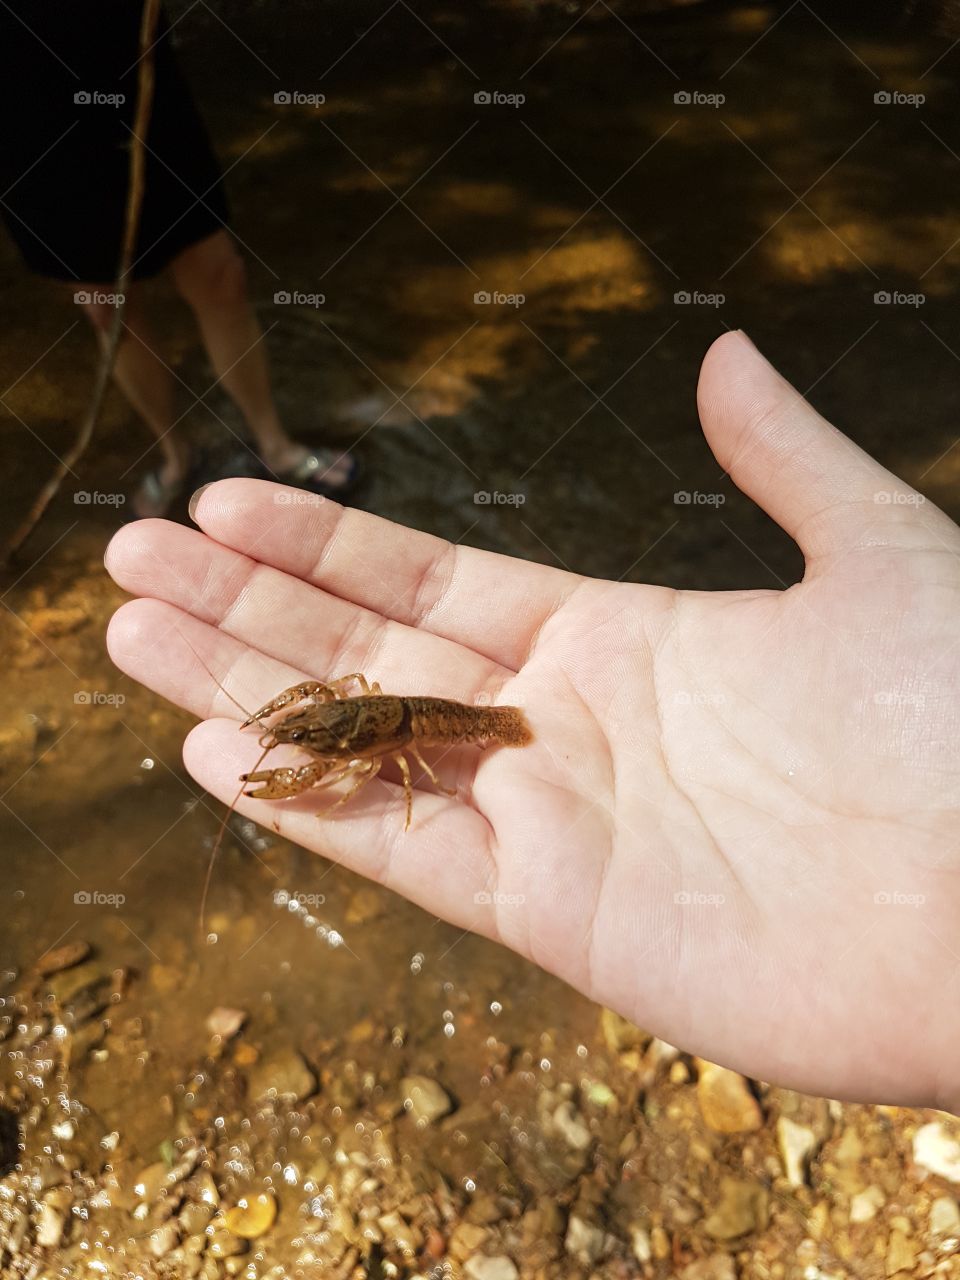 Small crawfish resting in Caucasian palm over shallow Brown creekbed full of rocks